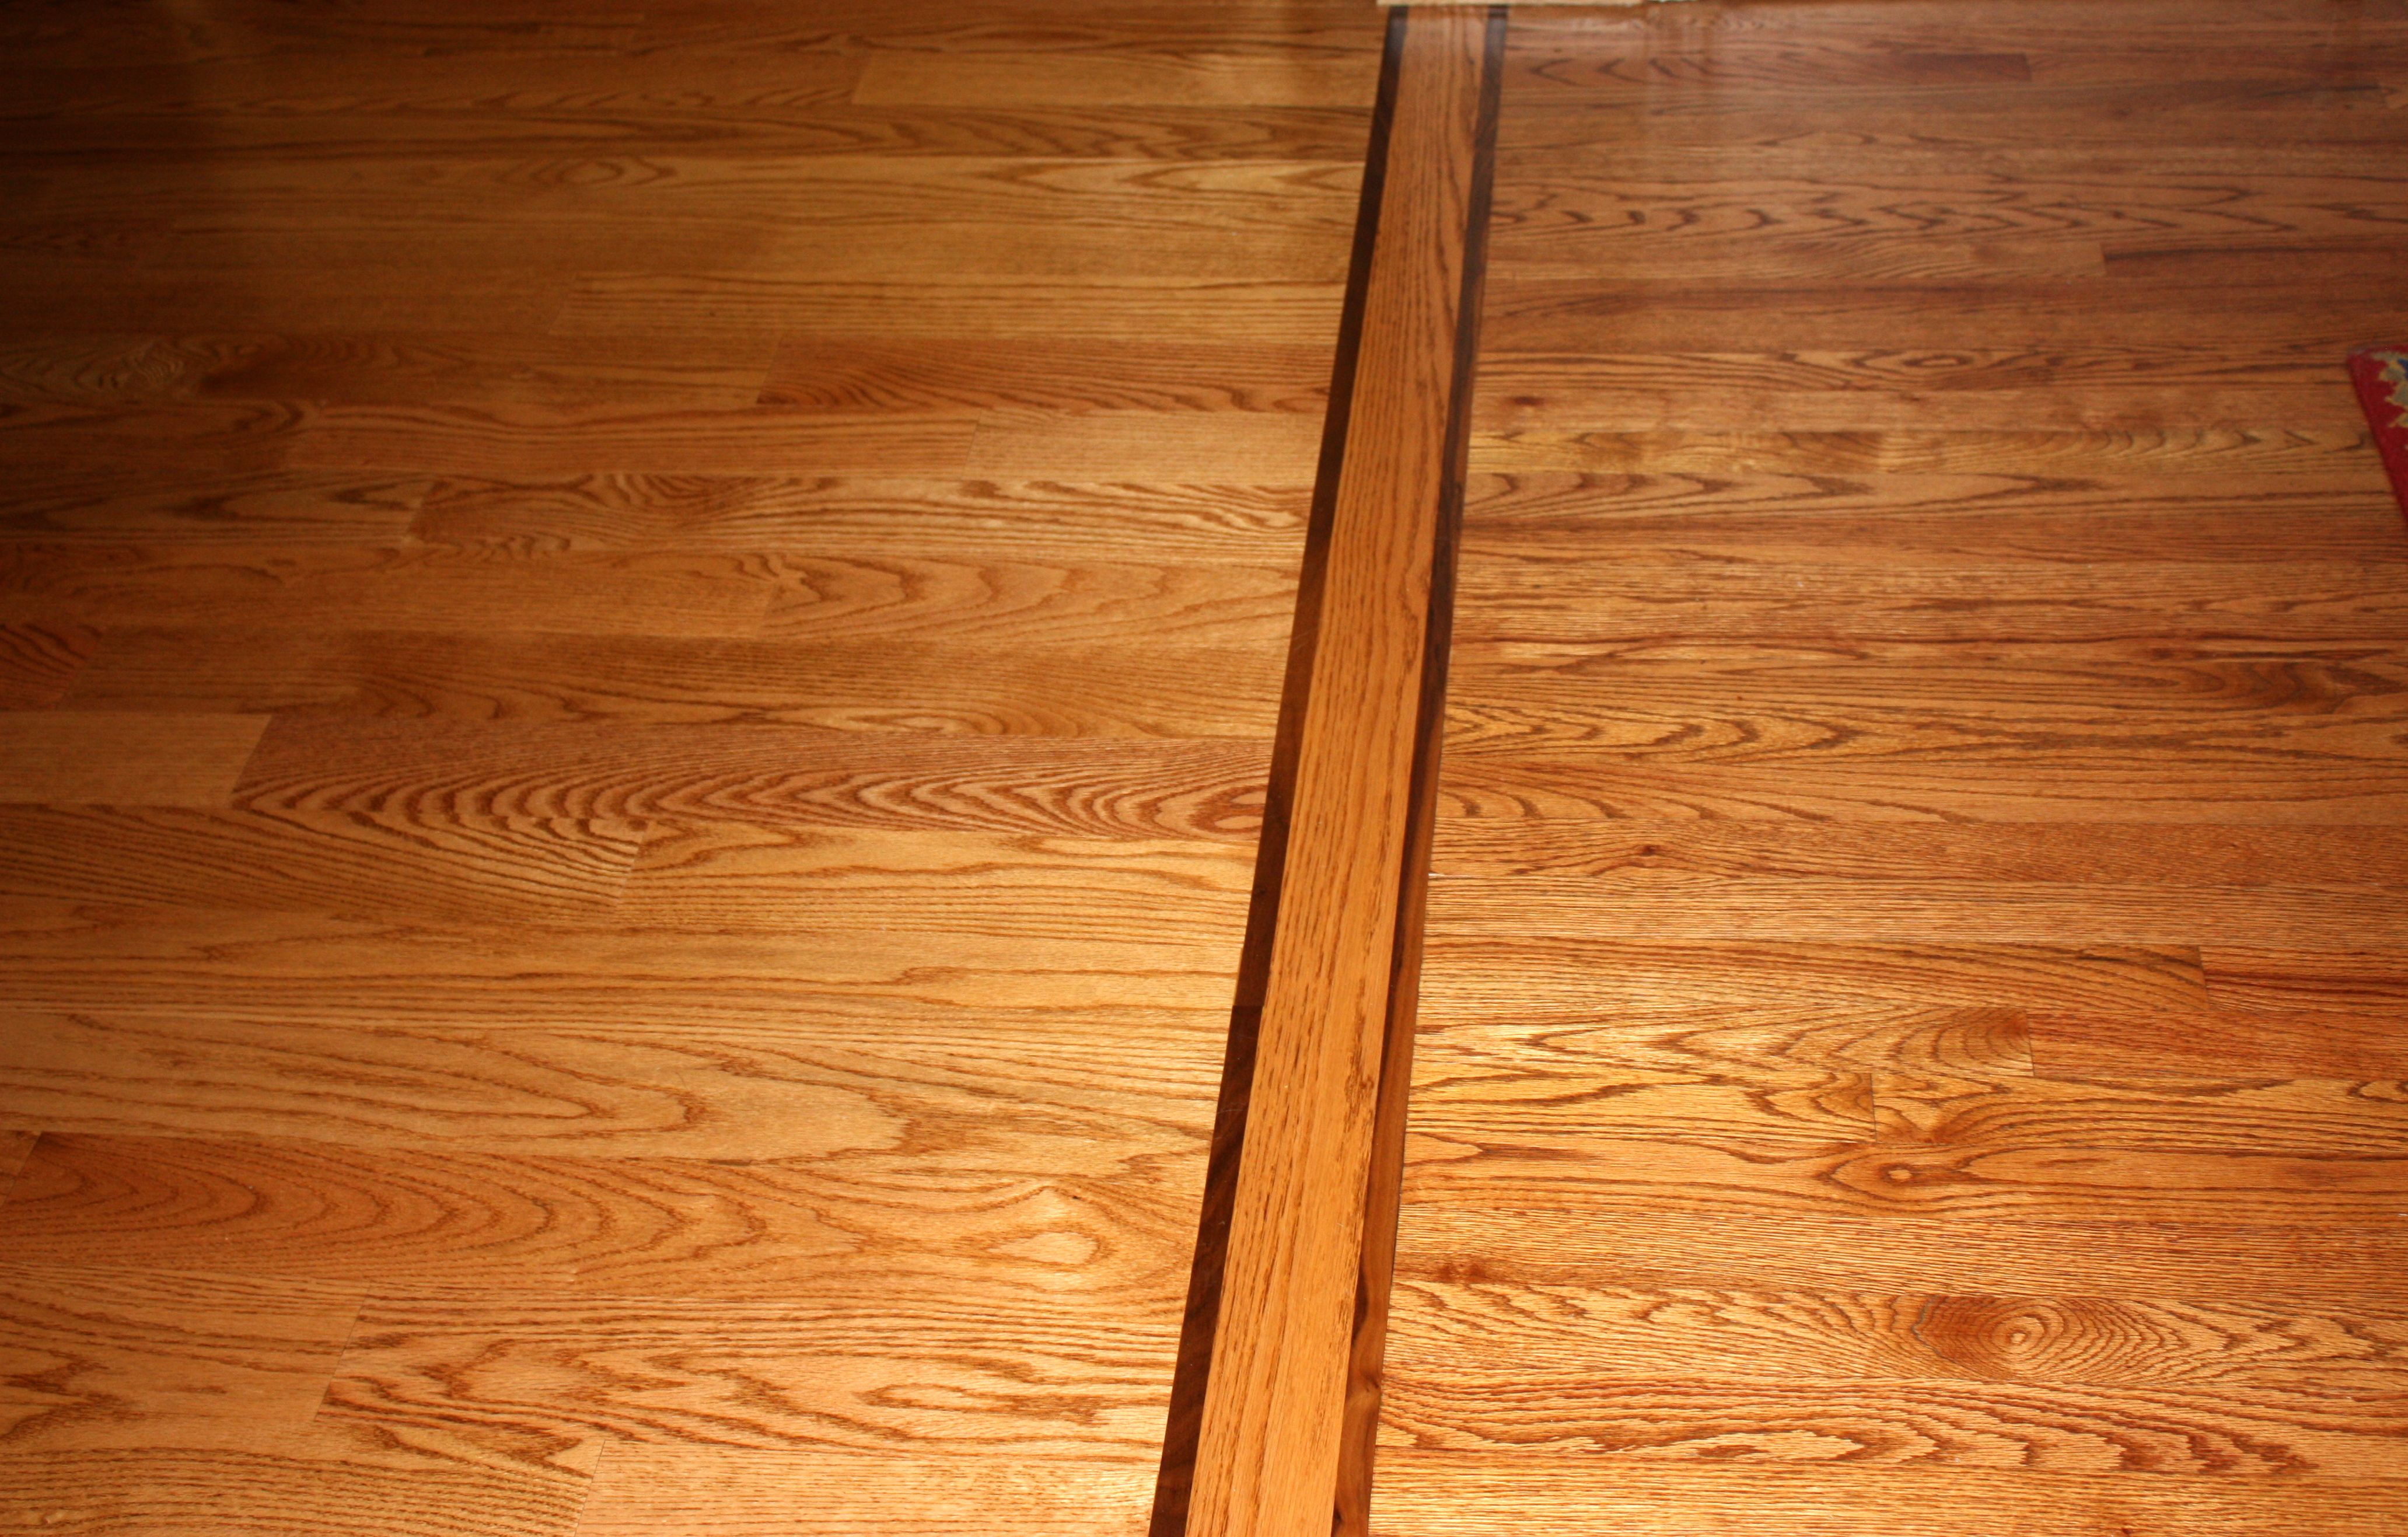 Matching An Existing Hardwood Floor, How Do You Match Existing Laminate Flooring